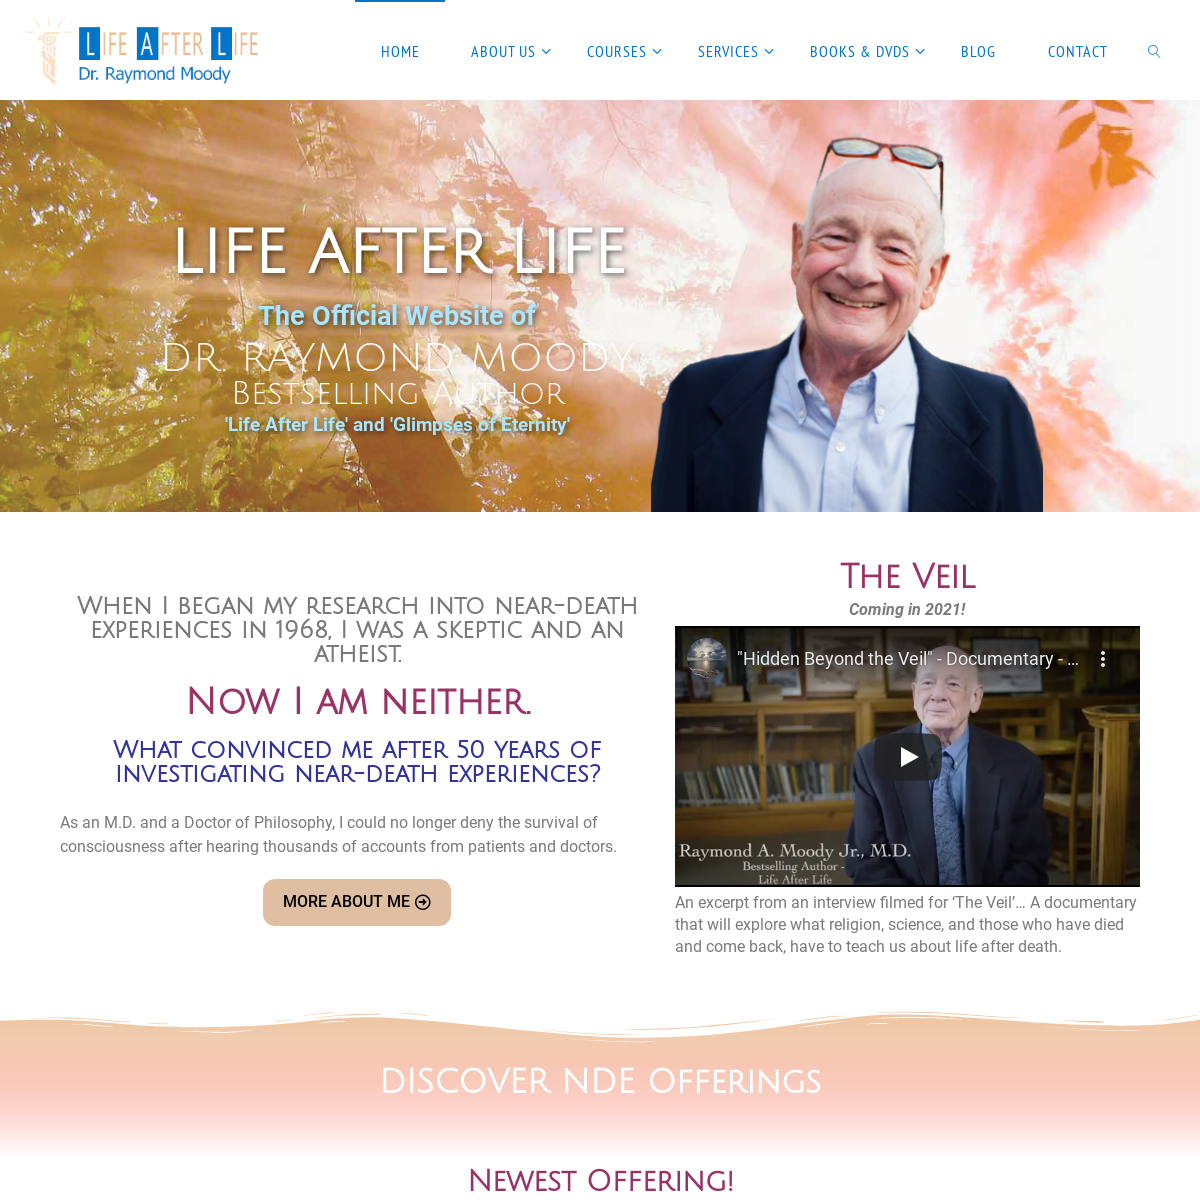 A complete backup of lifeafterlife.com